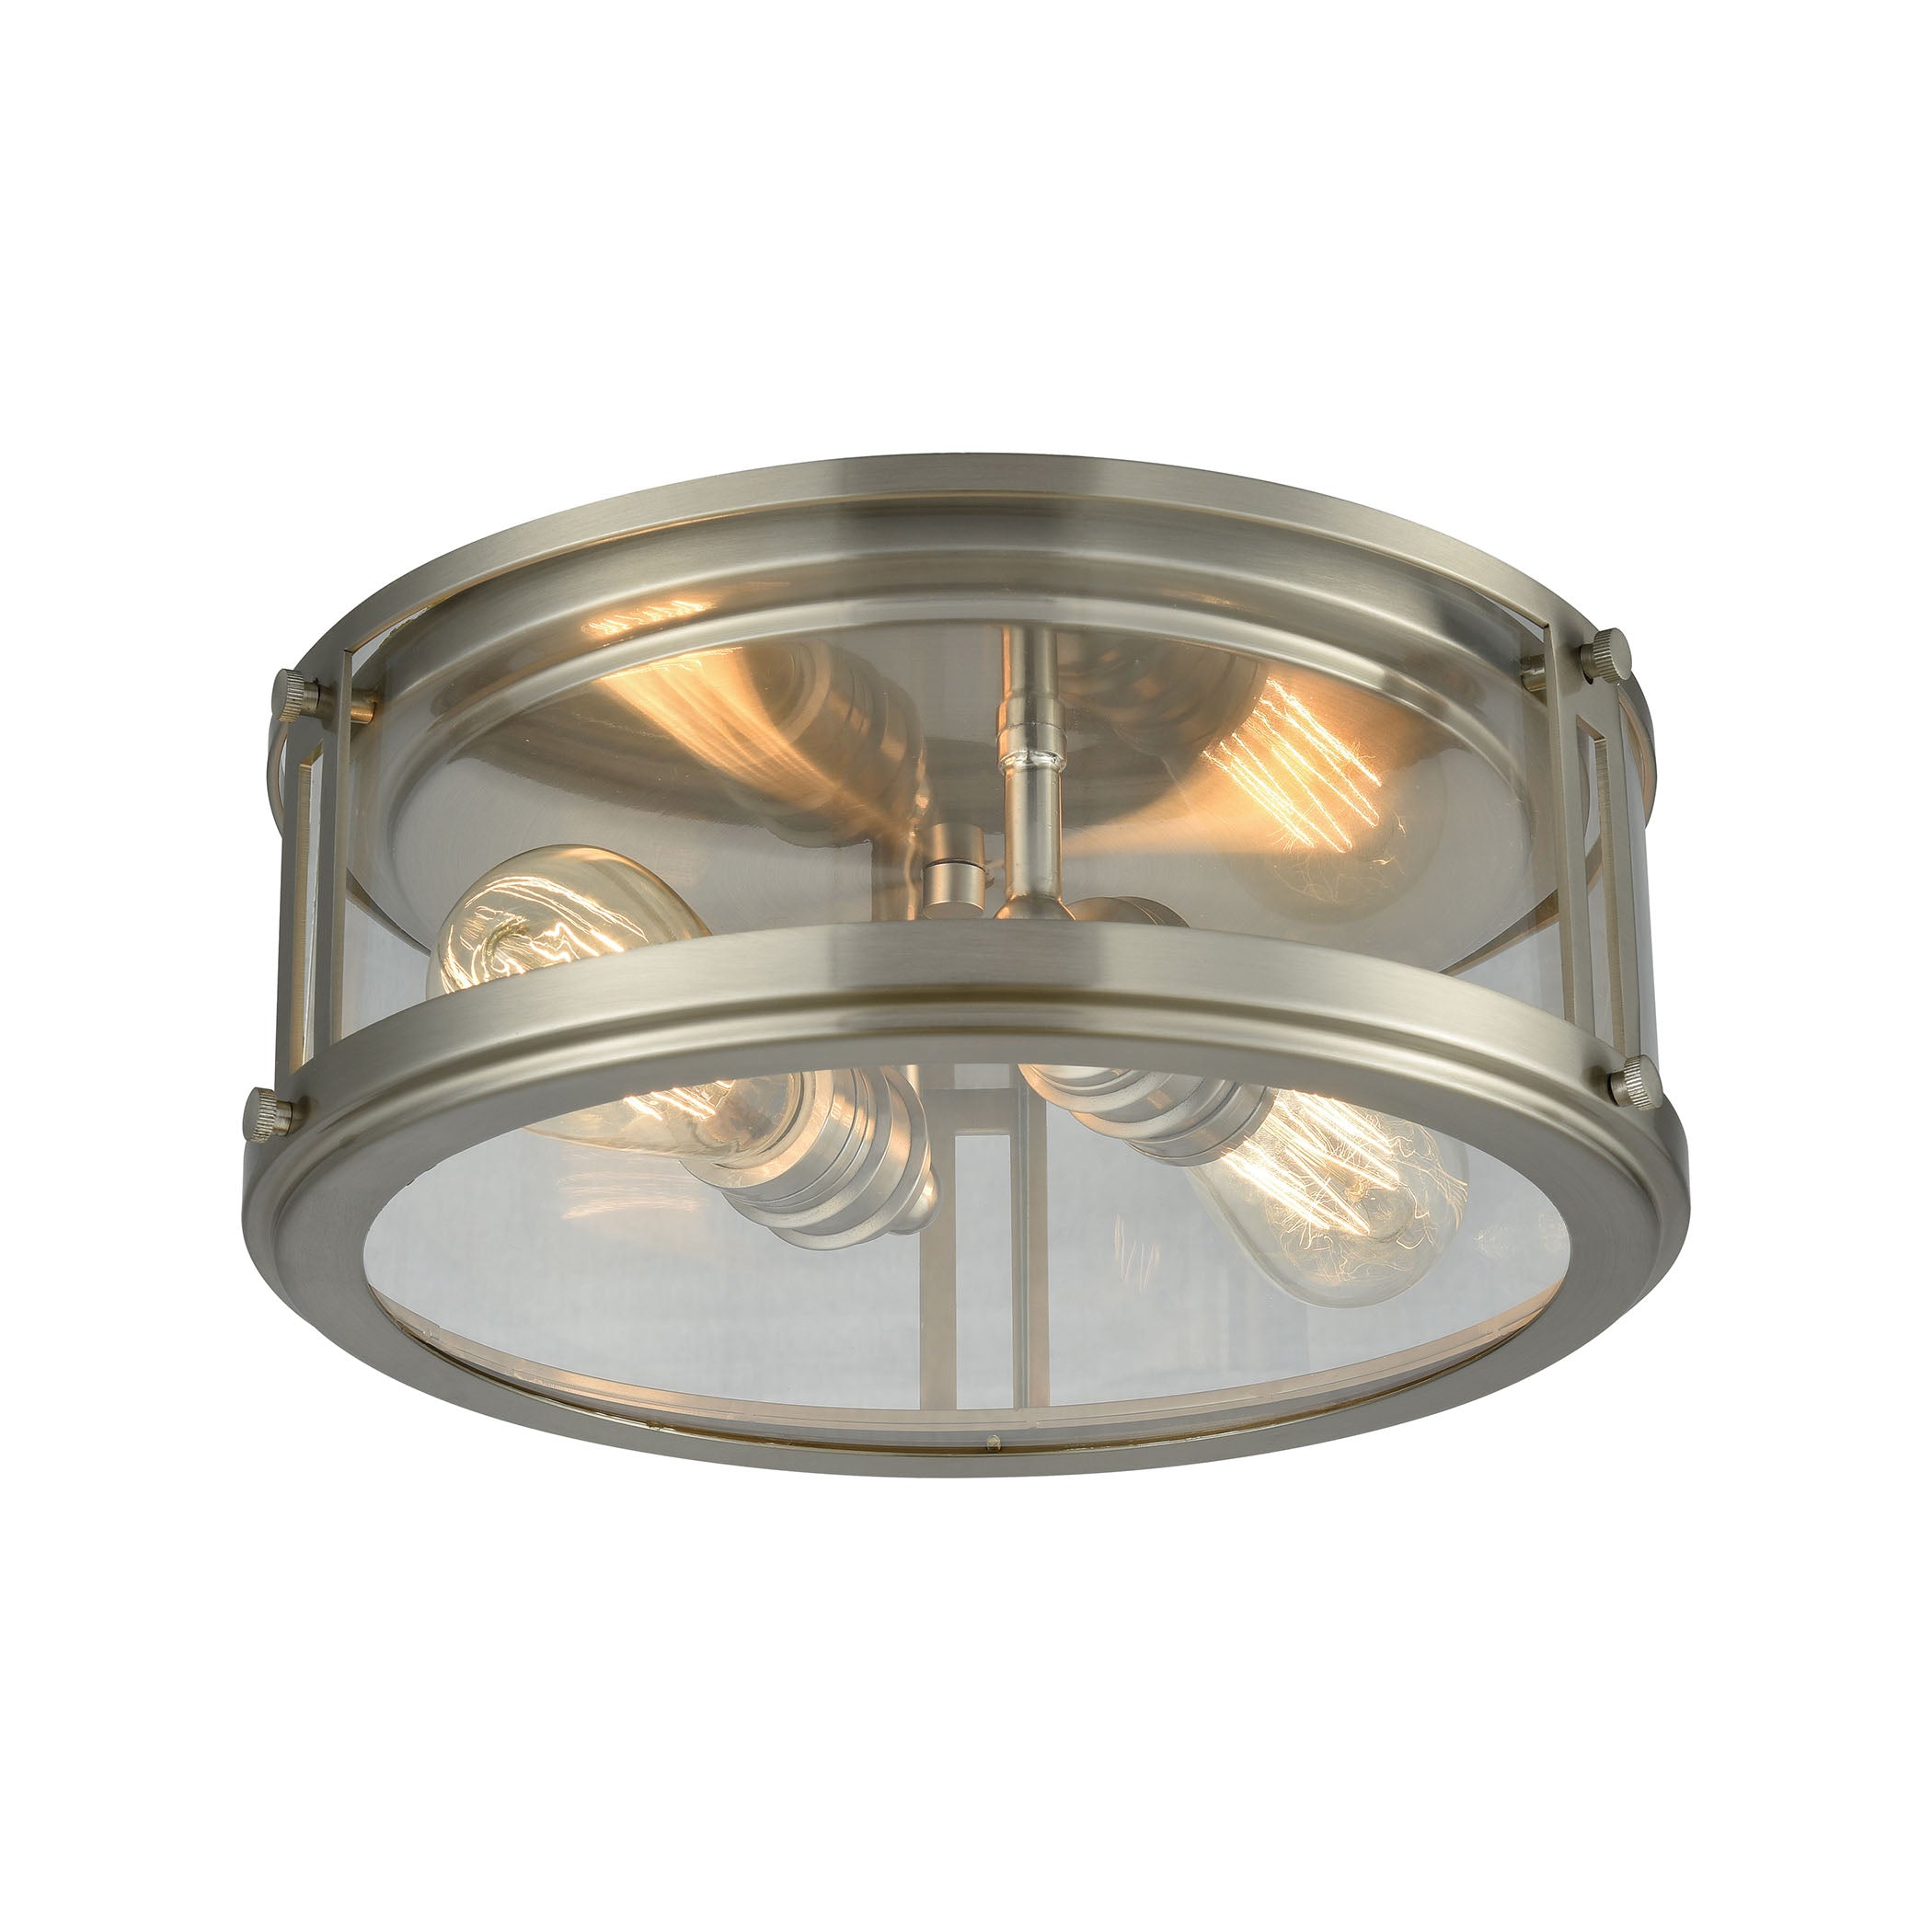 ELK Lighting 11860/2 Coby 2-Light Flush Mount in Brushed Nickel with Clear Glass